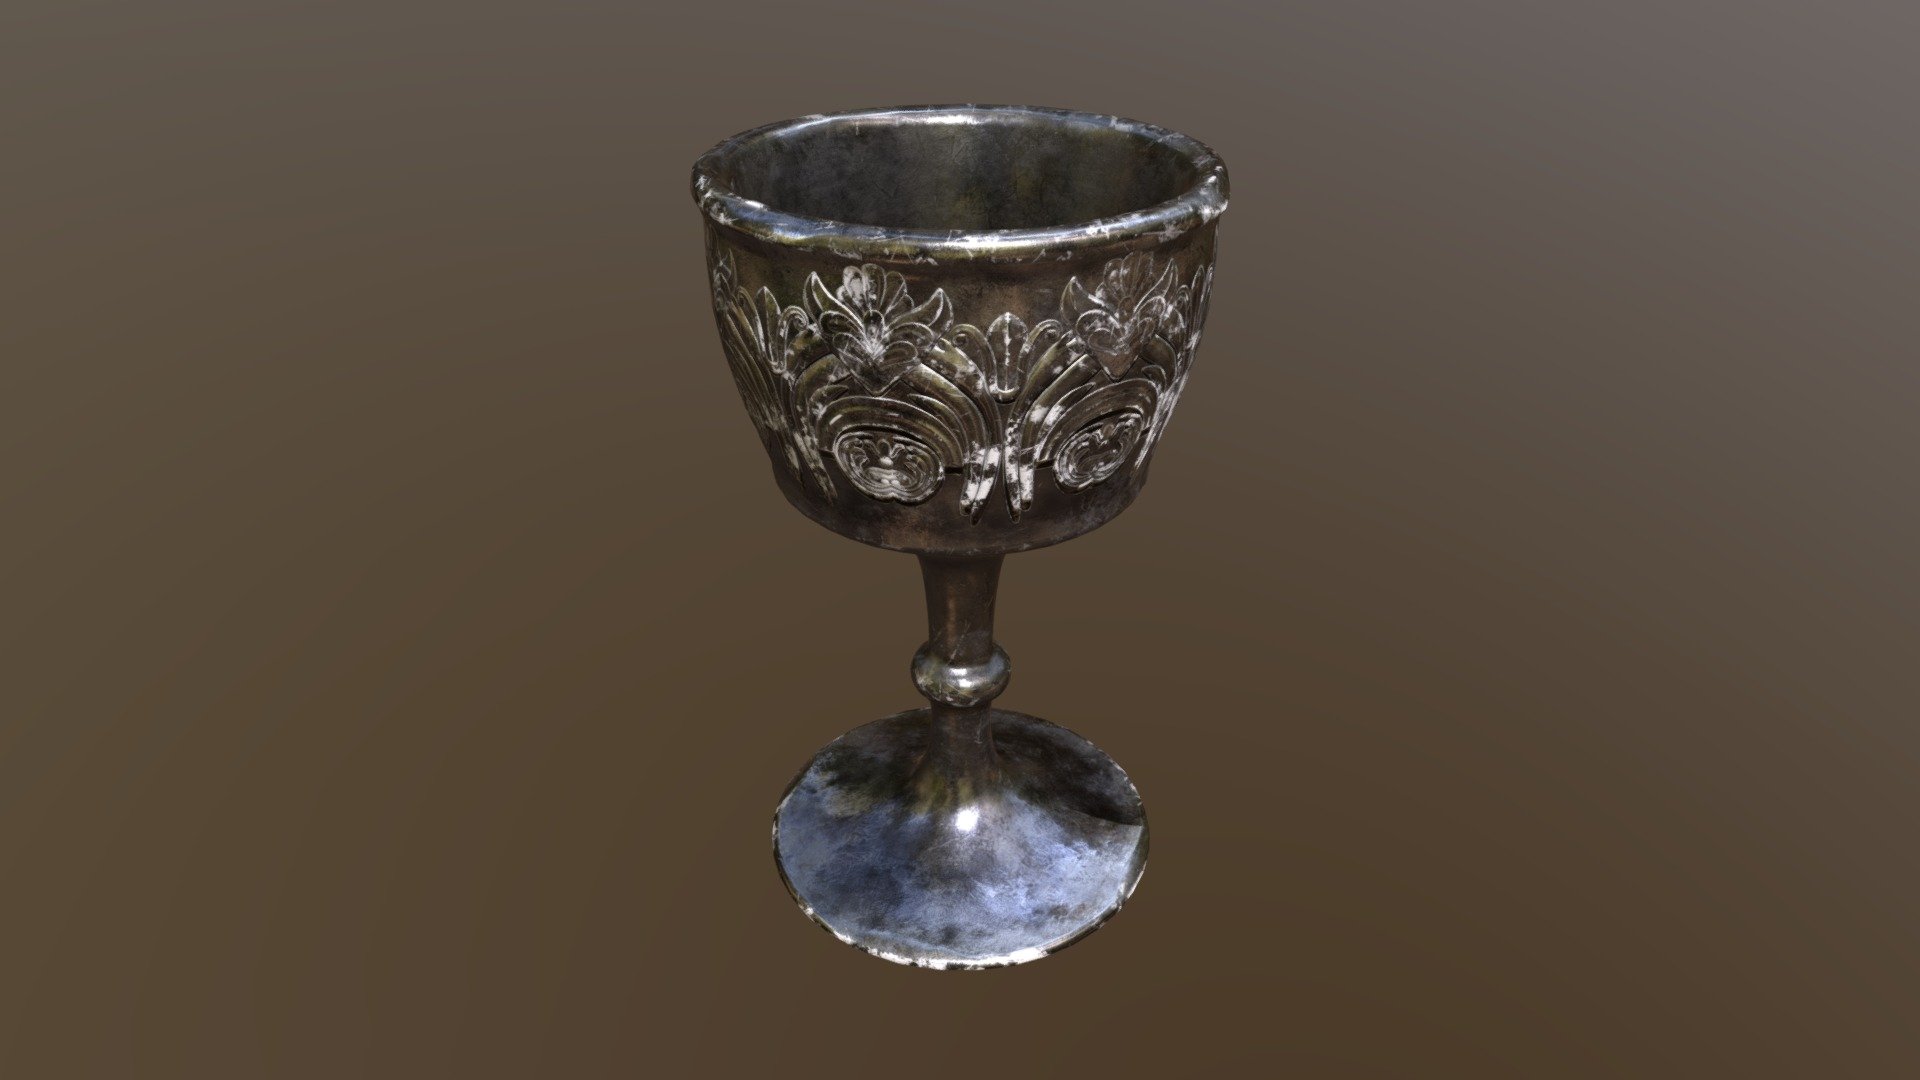 Royal Chalice 3D Model. This model contains the Royal Chalice itself 

All modeled in Maya, textured with Substance Painter.

The model was built to scale and is UV unwrapped properly. Contains only one 4K texture set.  

⦁   5200 tris. 

⦁   Contains: .FBX .OBJ and .DAE

⦁   Model has clean topology. No Ngons.

⦁   Built to scale

⦁   Unwrapped UV Map

⦁   4K Texture set

⦁   High quality details

⦁   Based on real life references

⦁   Renders done in Marmoset Toolbag

Polycount: 

Verts 2602

Edges 5240

Faces 2640

Tris 5200

If you have any questions please feel free to ask me 3d model